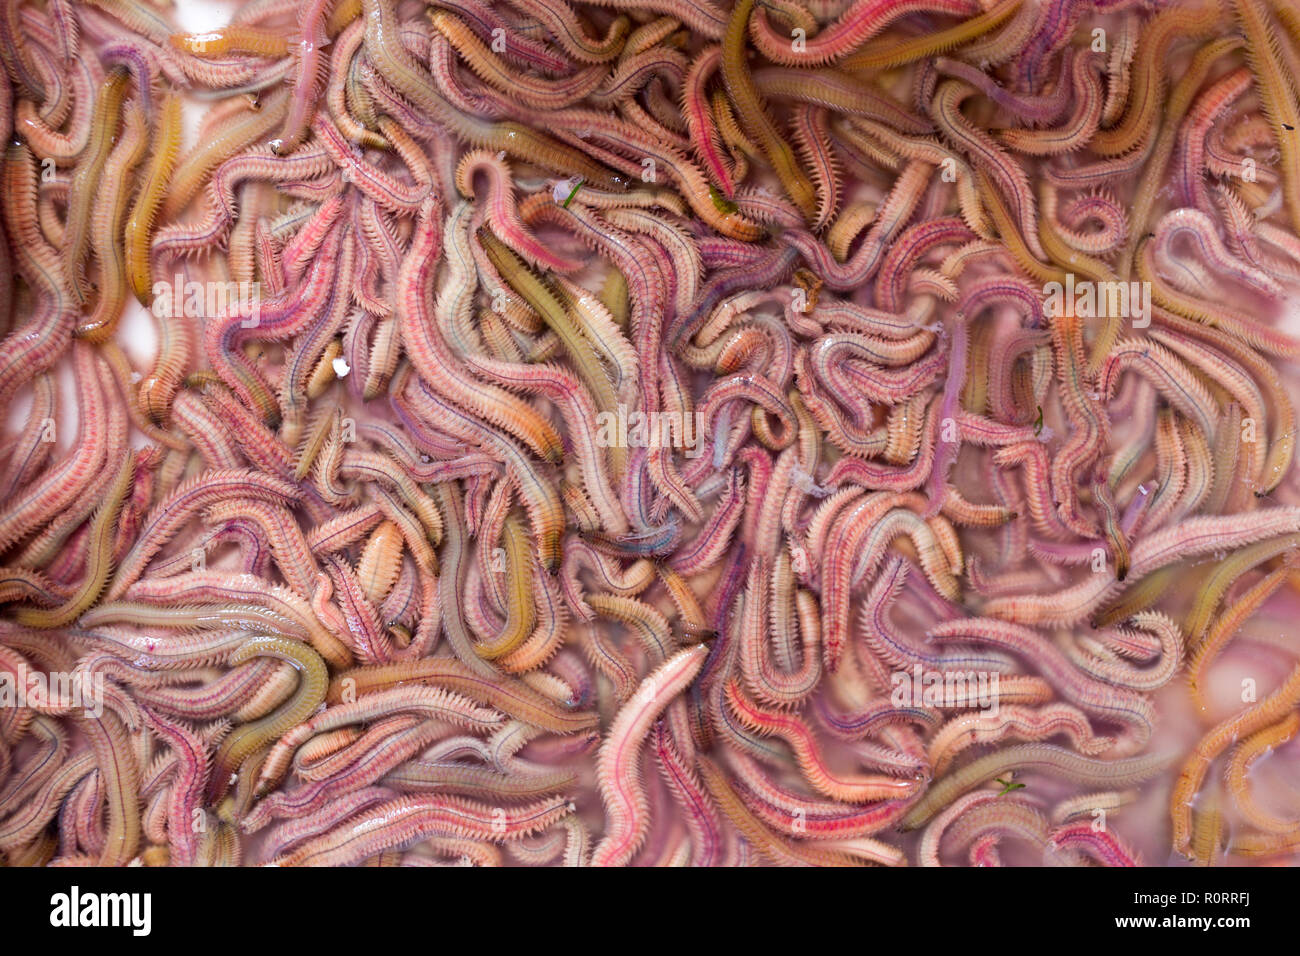 Alive sandworms in a Vietnamese street market, food ingredient for Cha Ruoi omelette Stock Photo